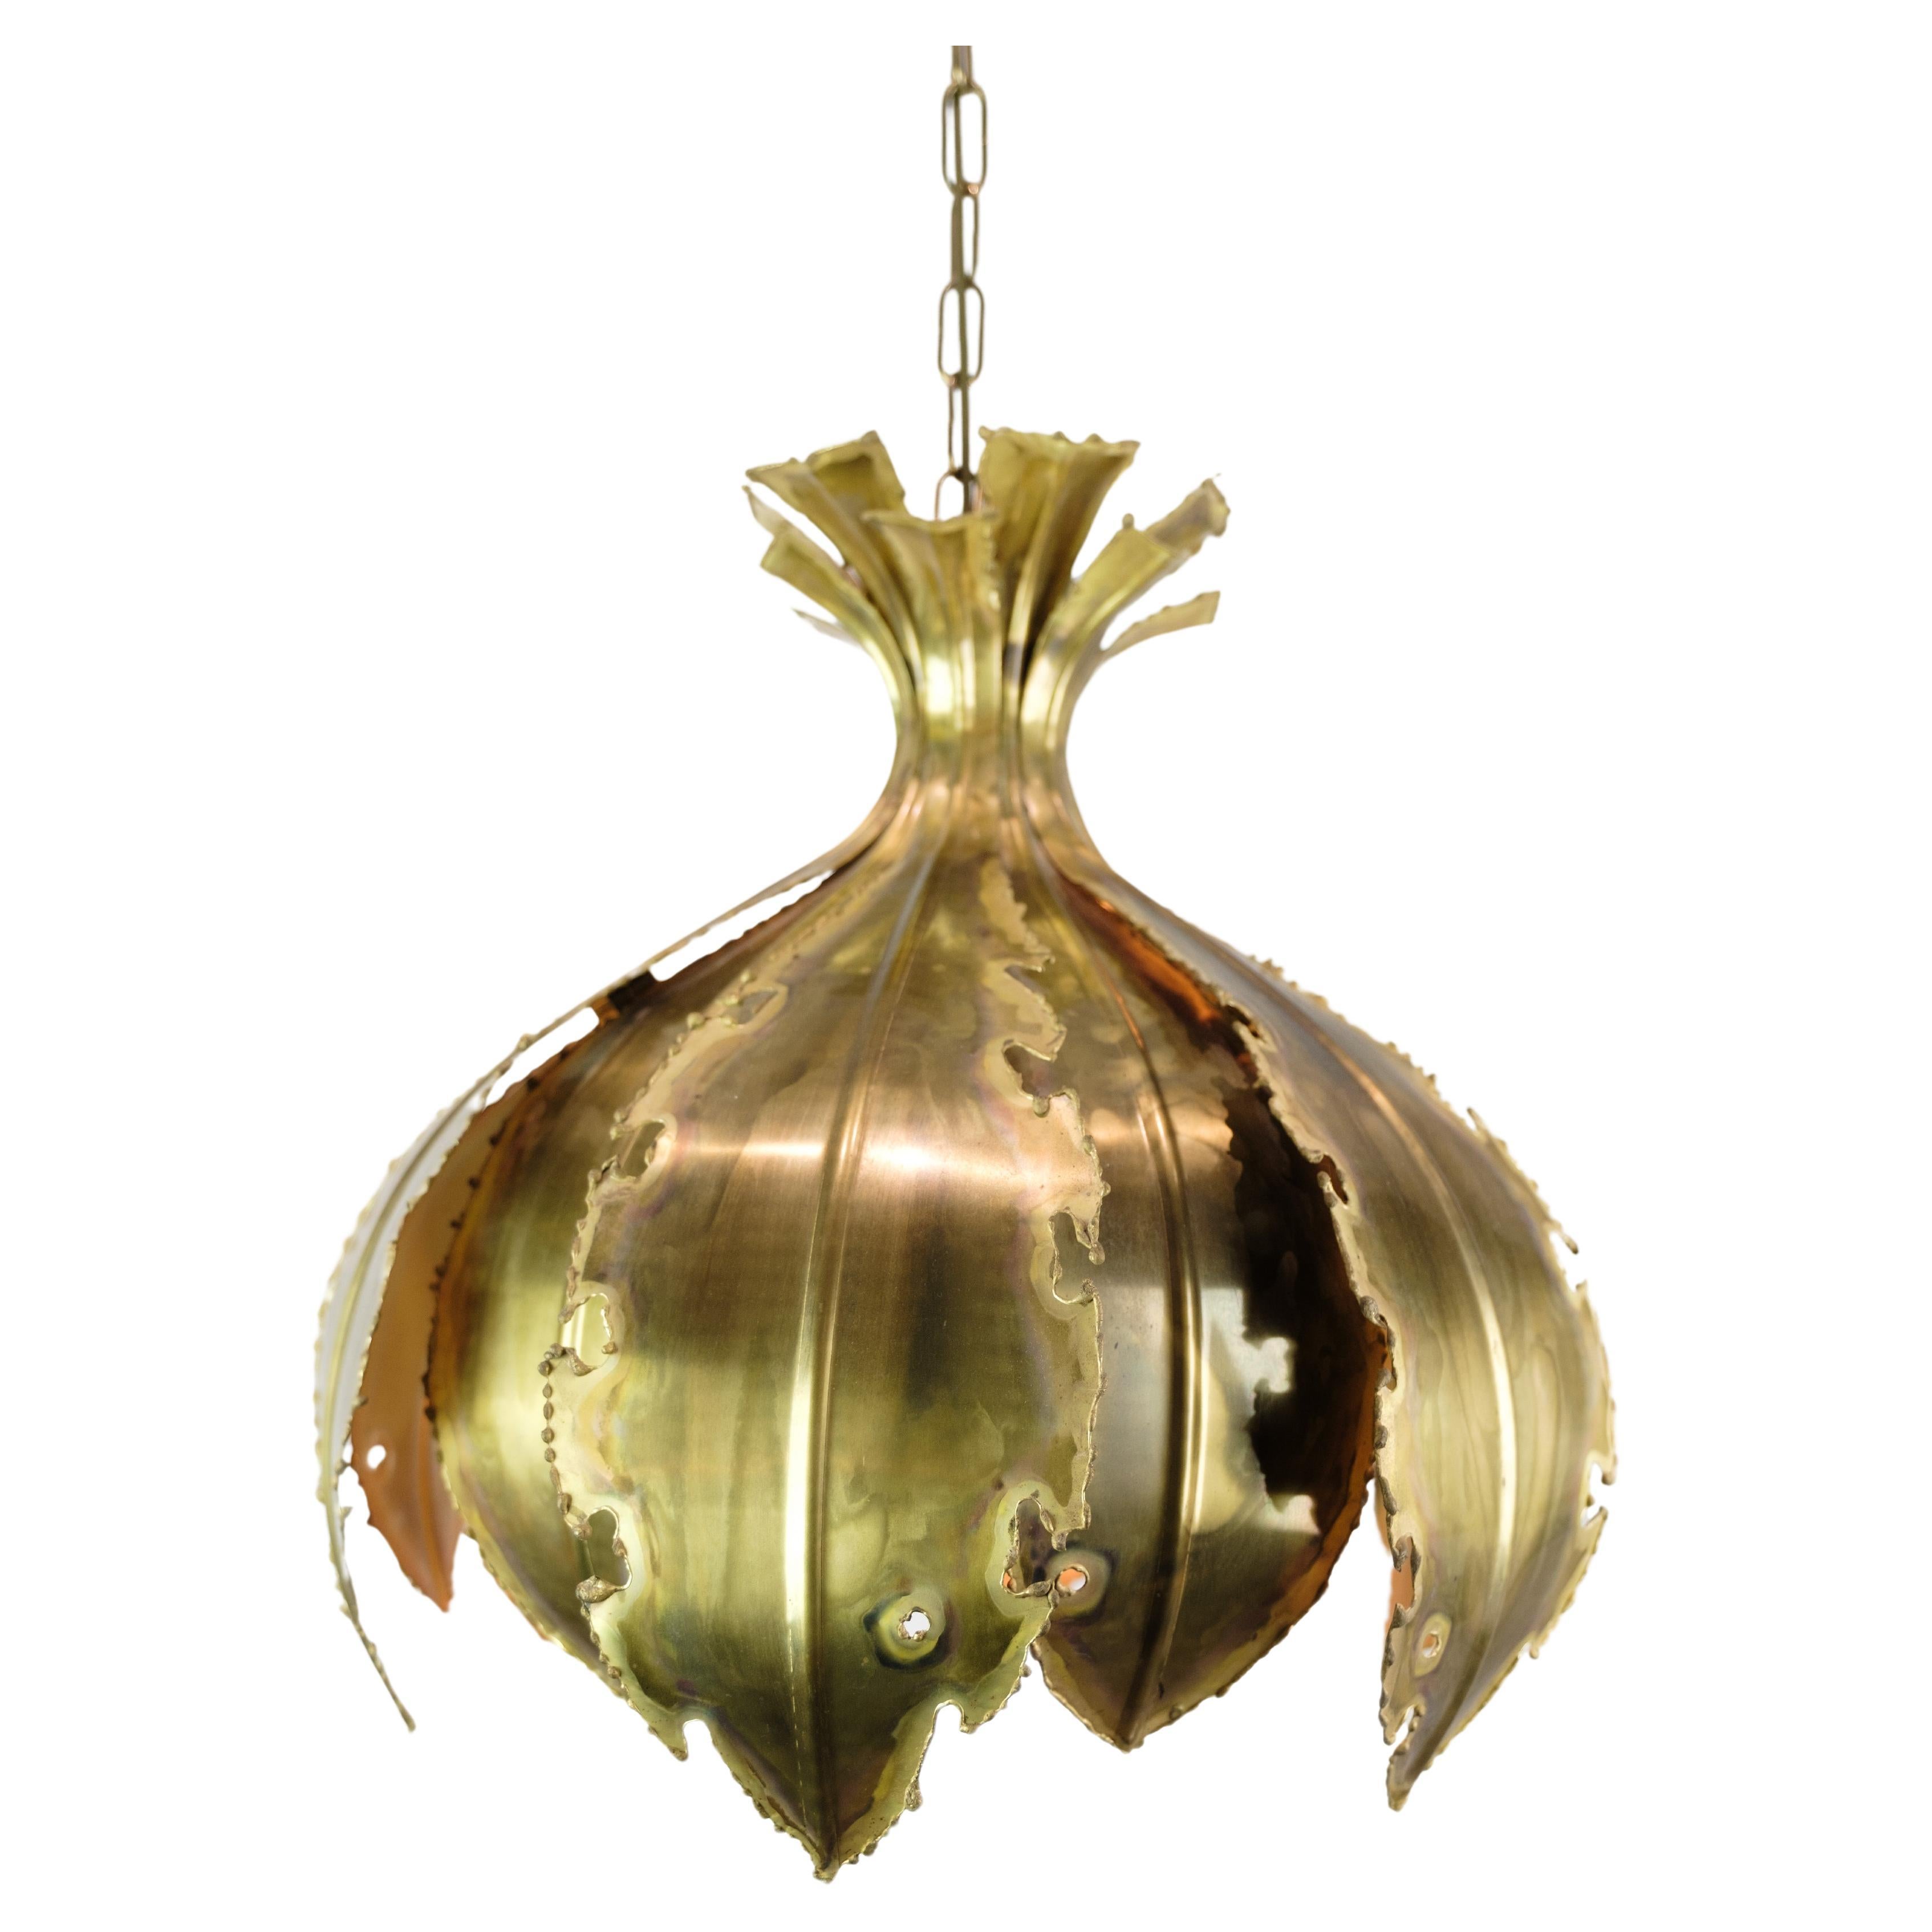 Ceiling lamp In Brass, Designed By Sven Aage Holm Sørensen From 1960s